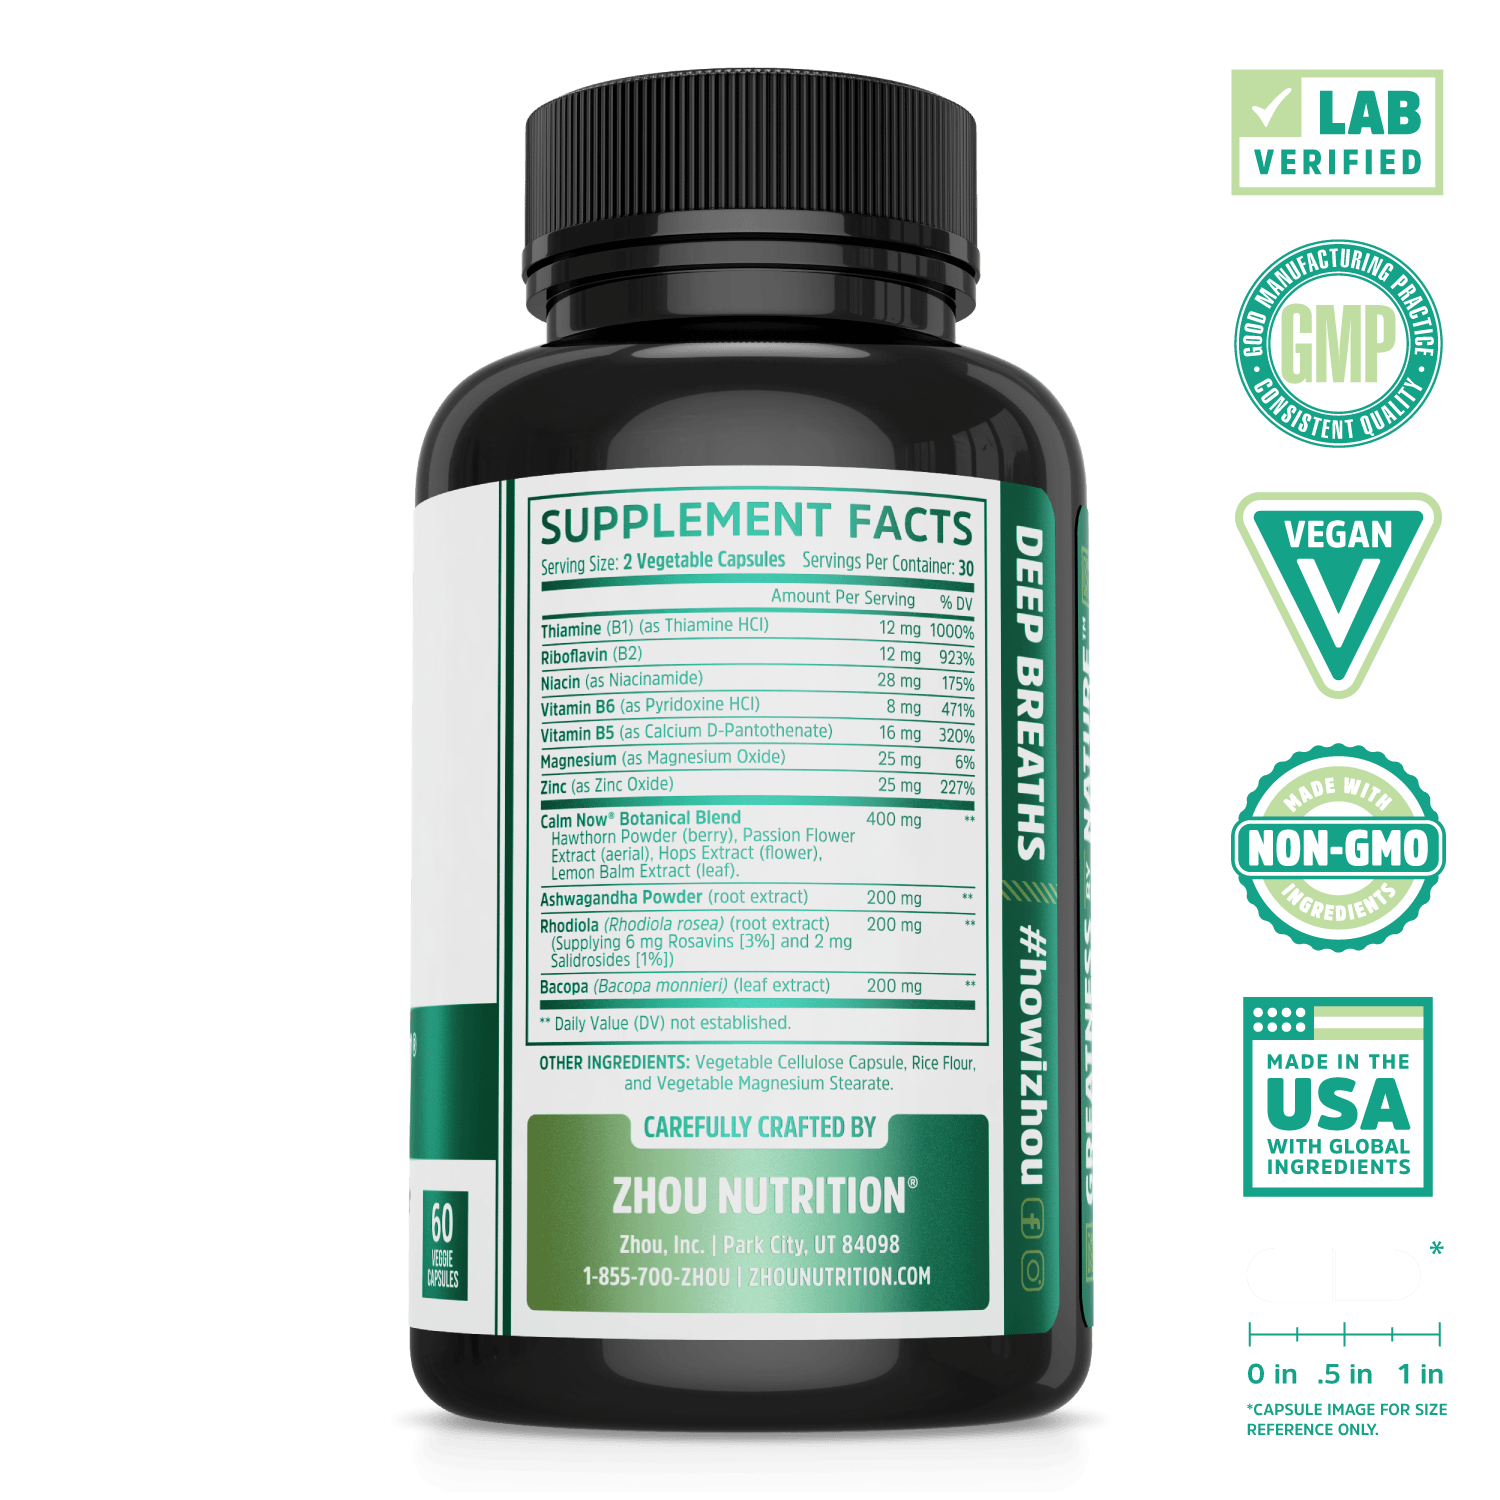 Zhou Nutrition Calm Now Supplement For Stress. Bottle side. Lab verified, good manufacturing practices, vegan, made with non-GMO ingredients, made in the USA with global ingredients.